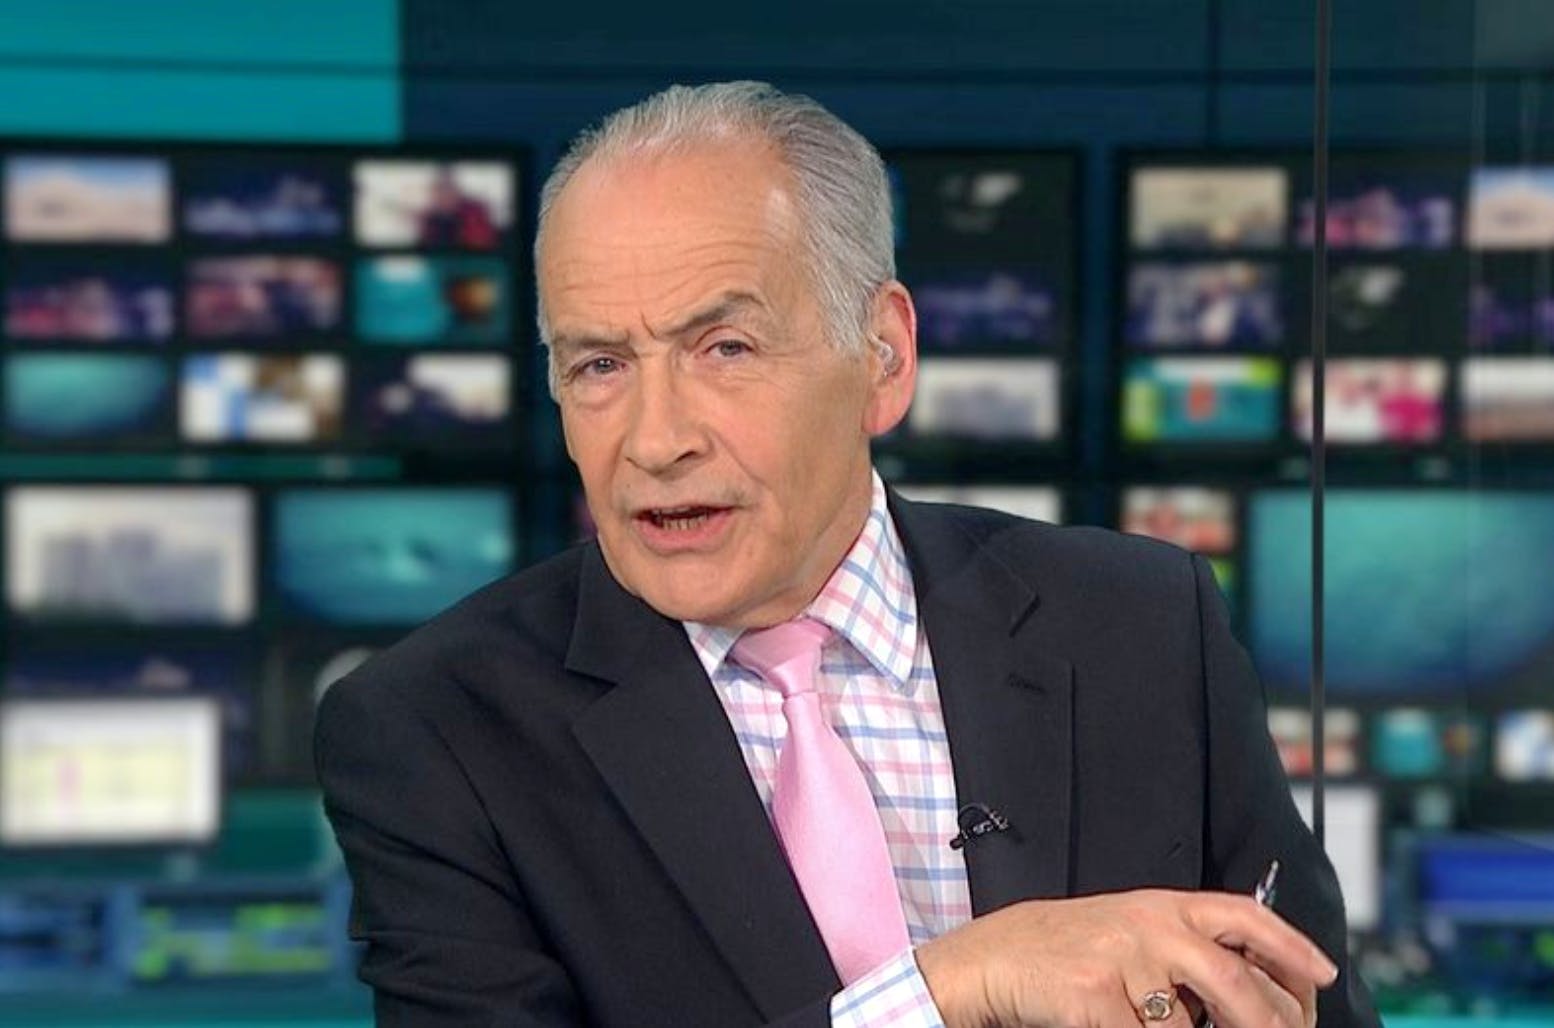 ITV broadcaster Alastair Stewart was even defended by his accuser